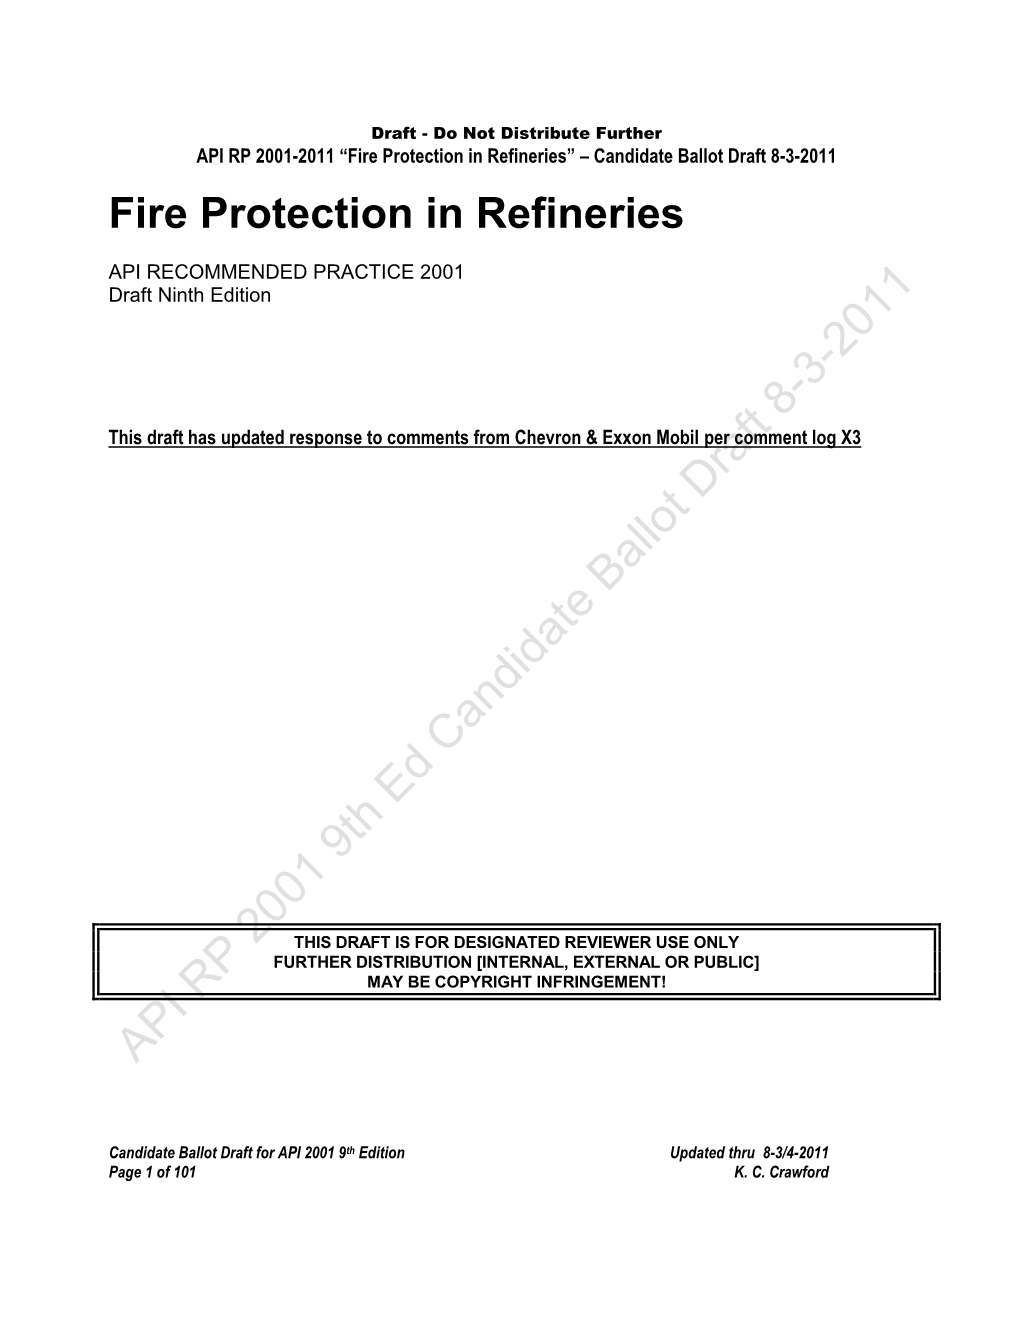 Fire Protection in Refineries” – Candidate Ballot Draft 8-3-2011